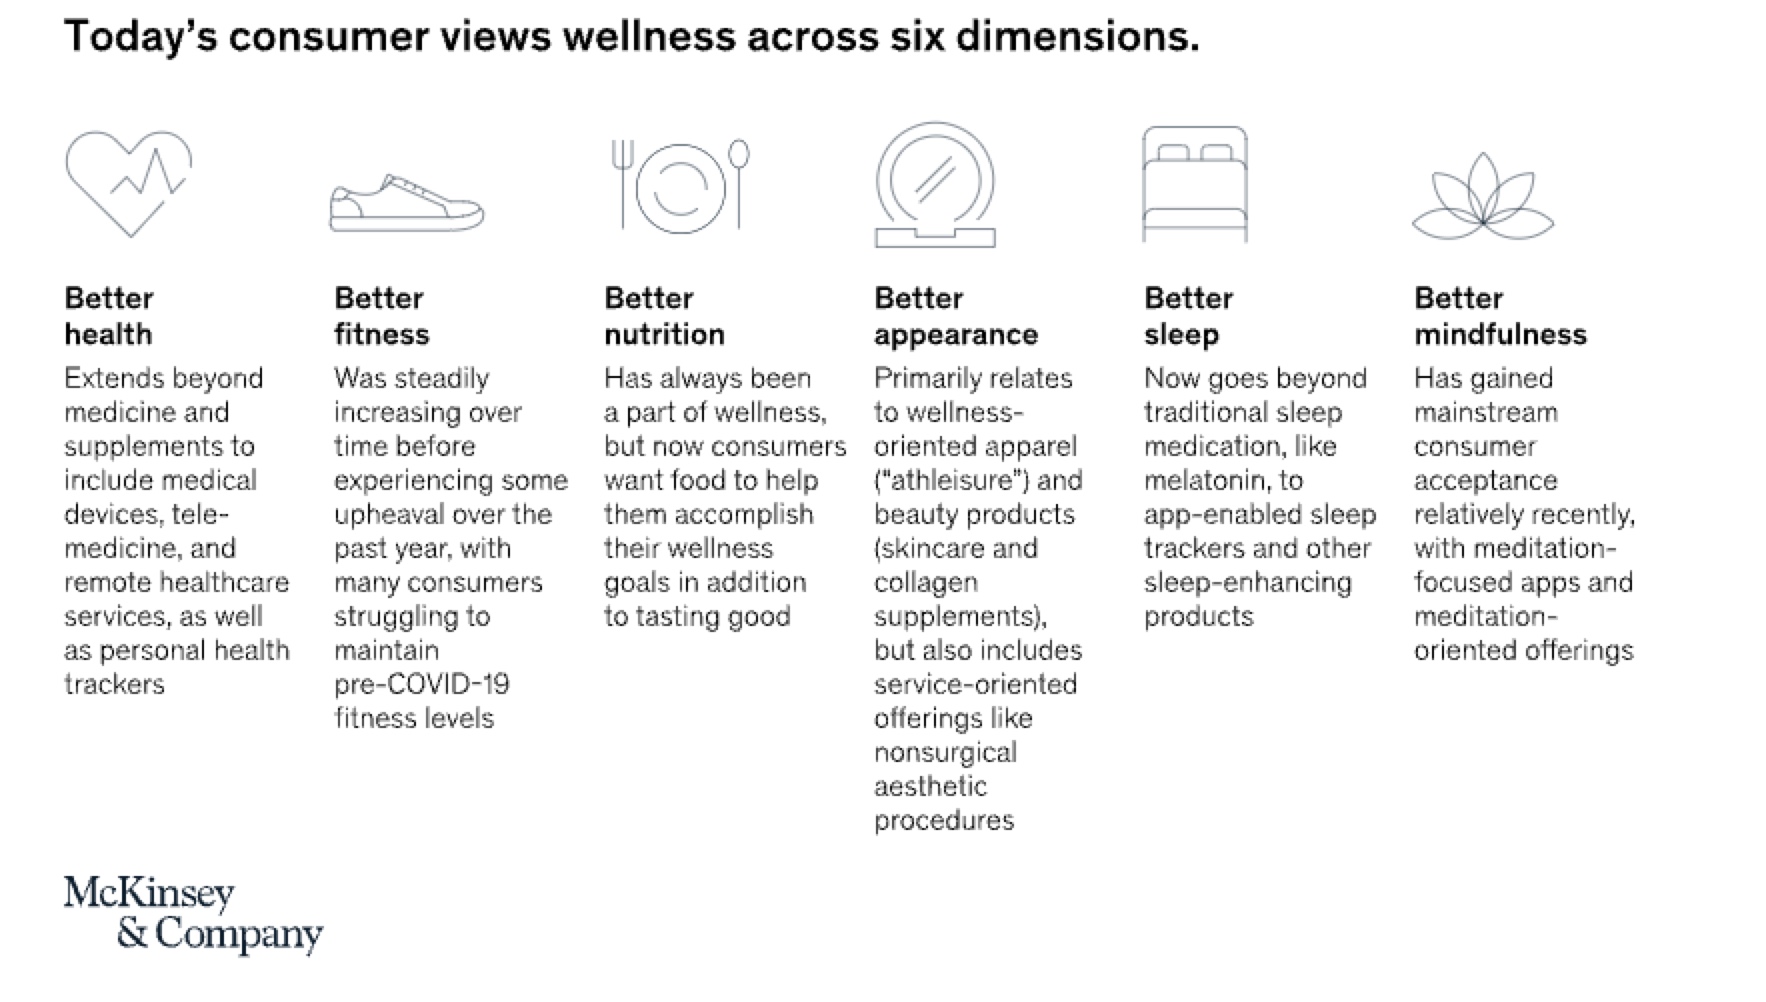 Consumer’s view on wellness